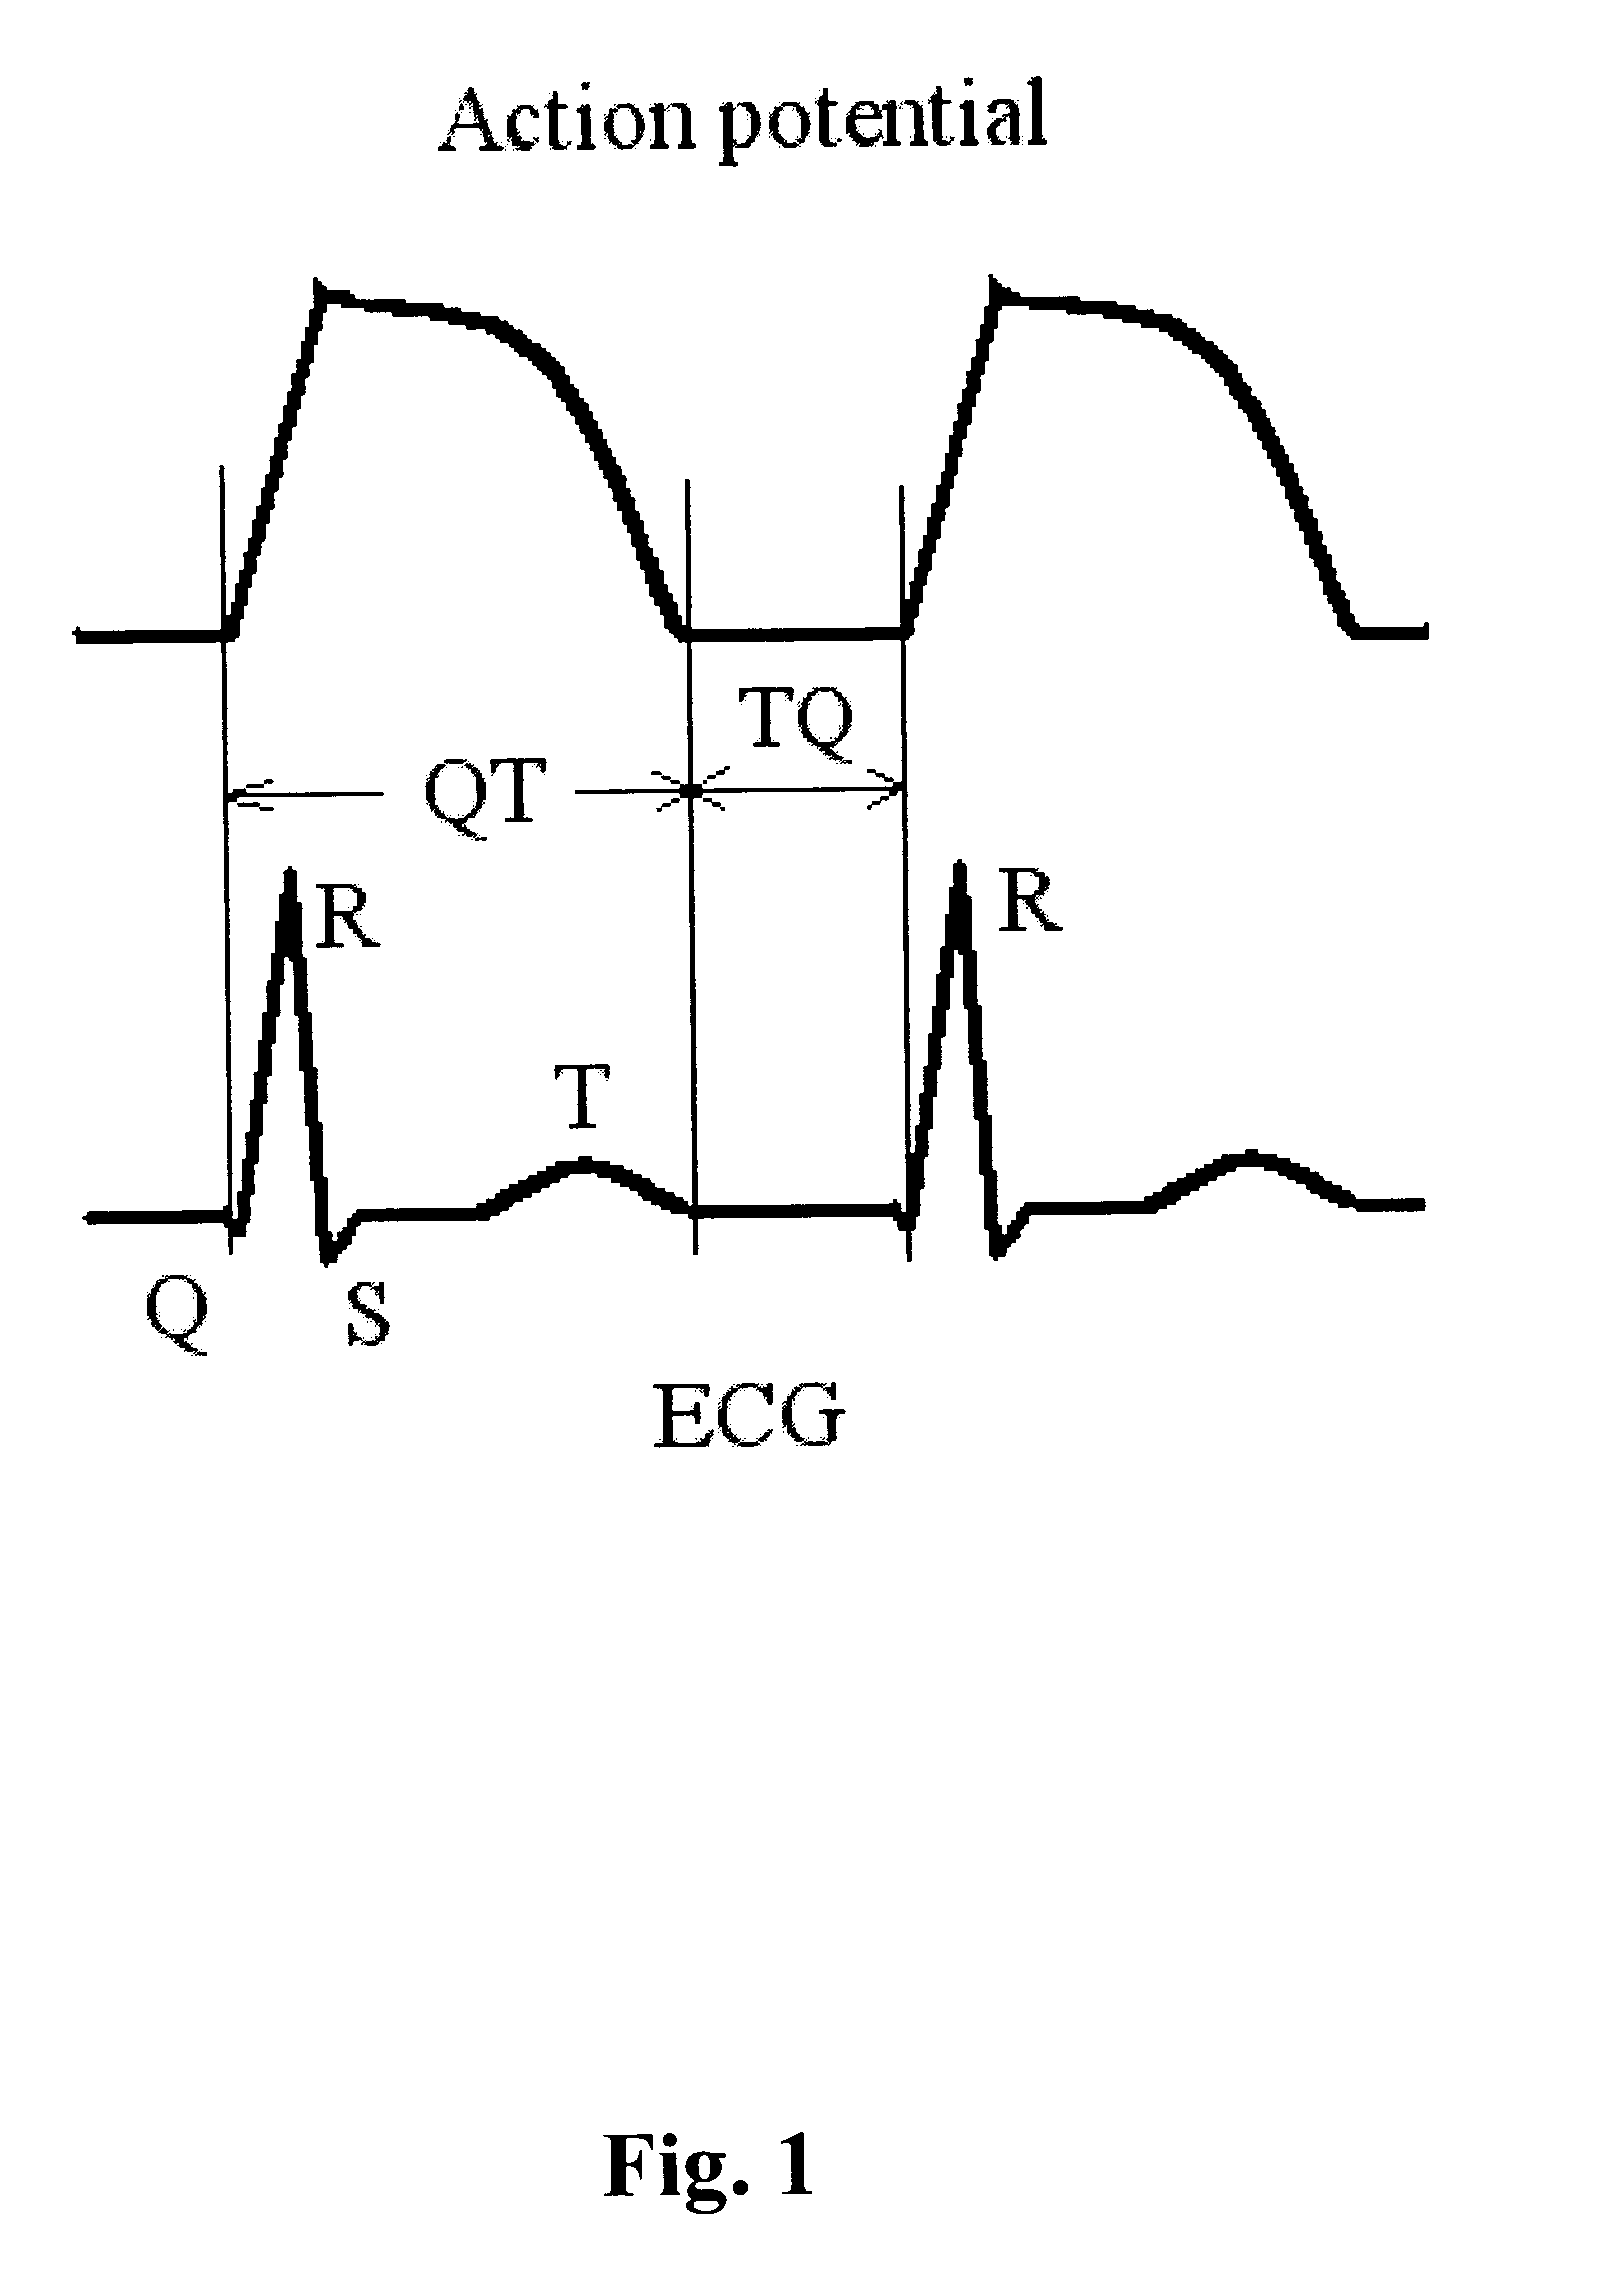 Method and system for evaluating cardiac ischemia based on heart rate fluctuations